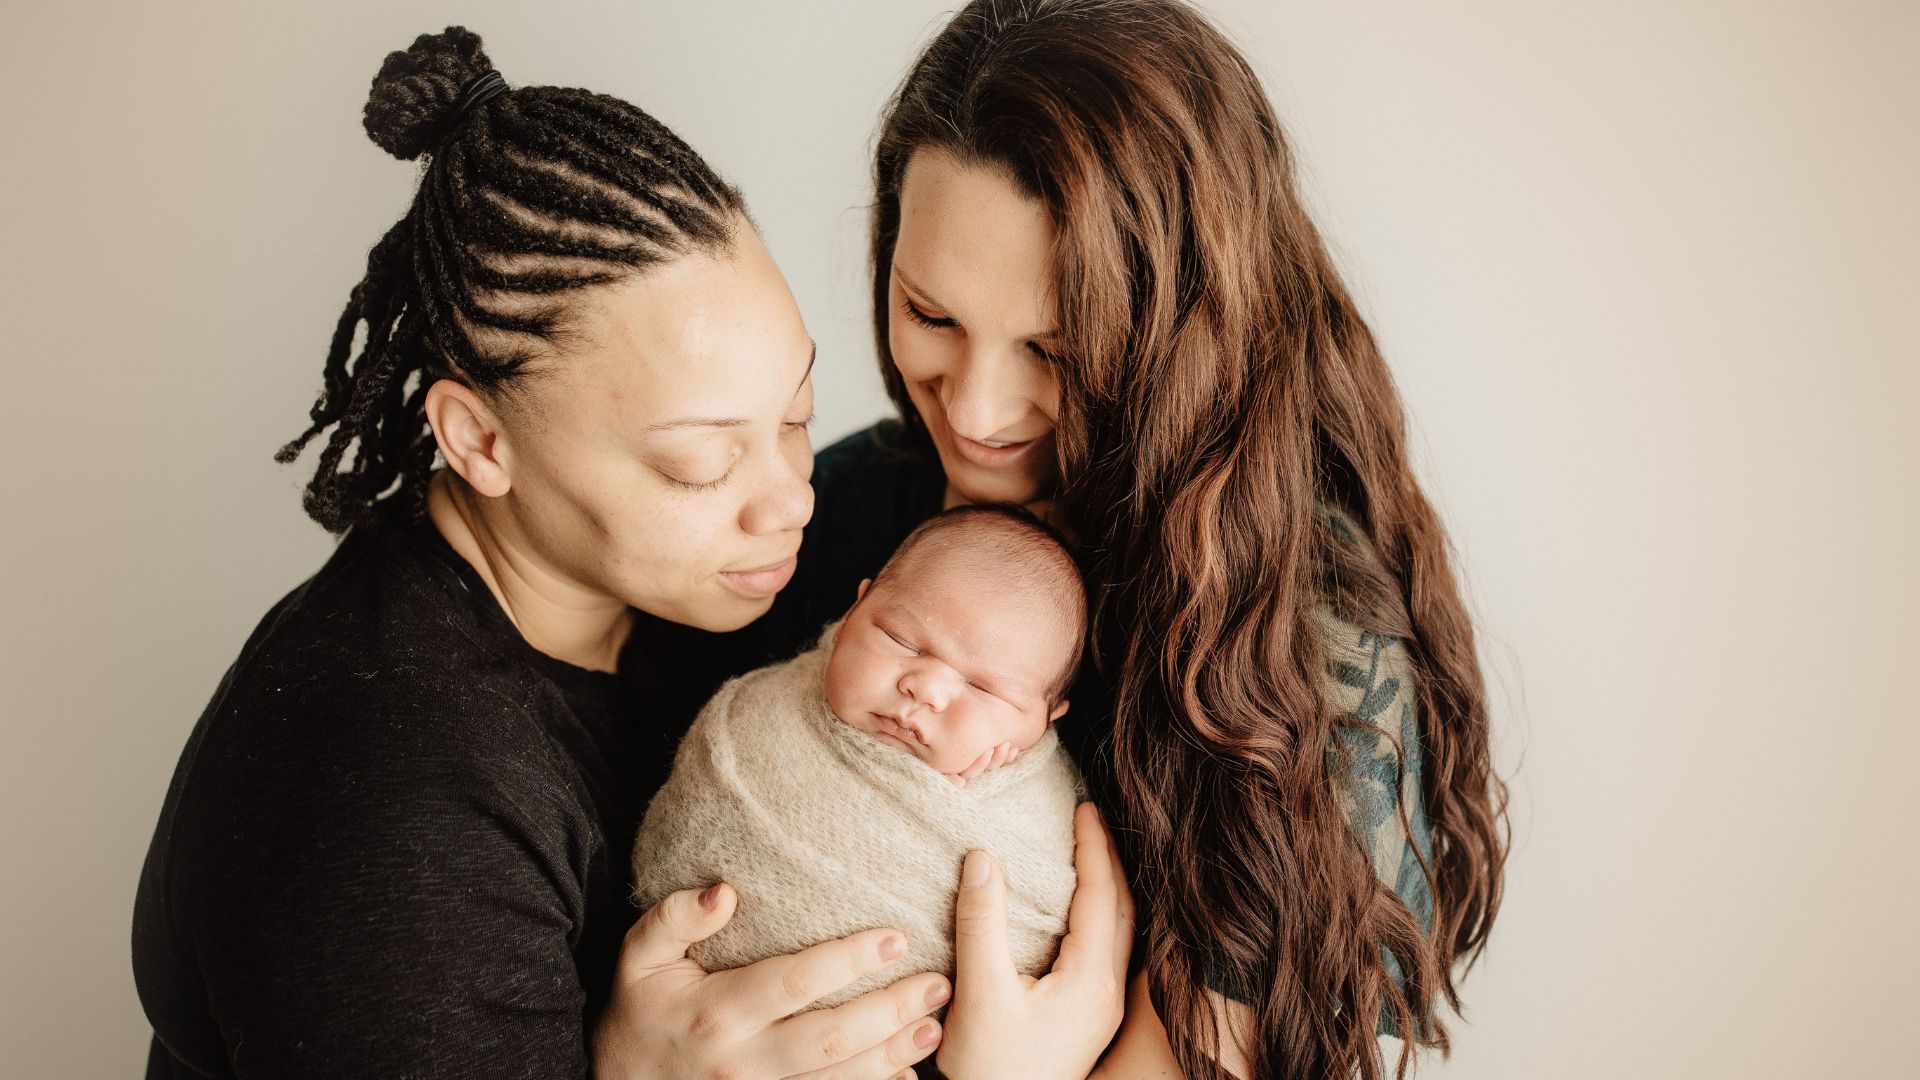 Photo of an interracial couple in the LGBTQIA+ community, holding their new baby.